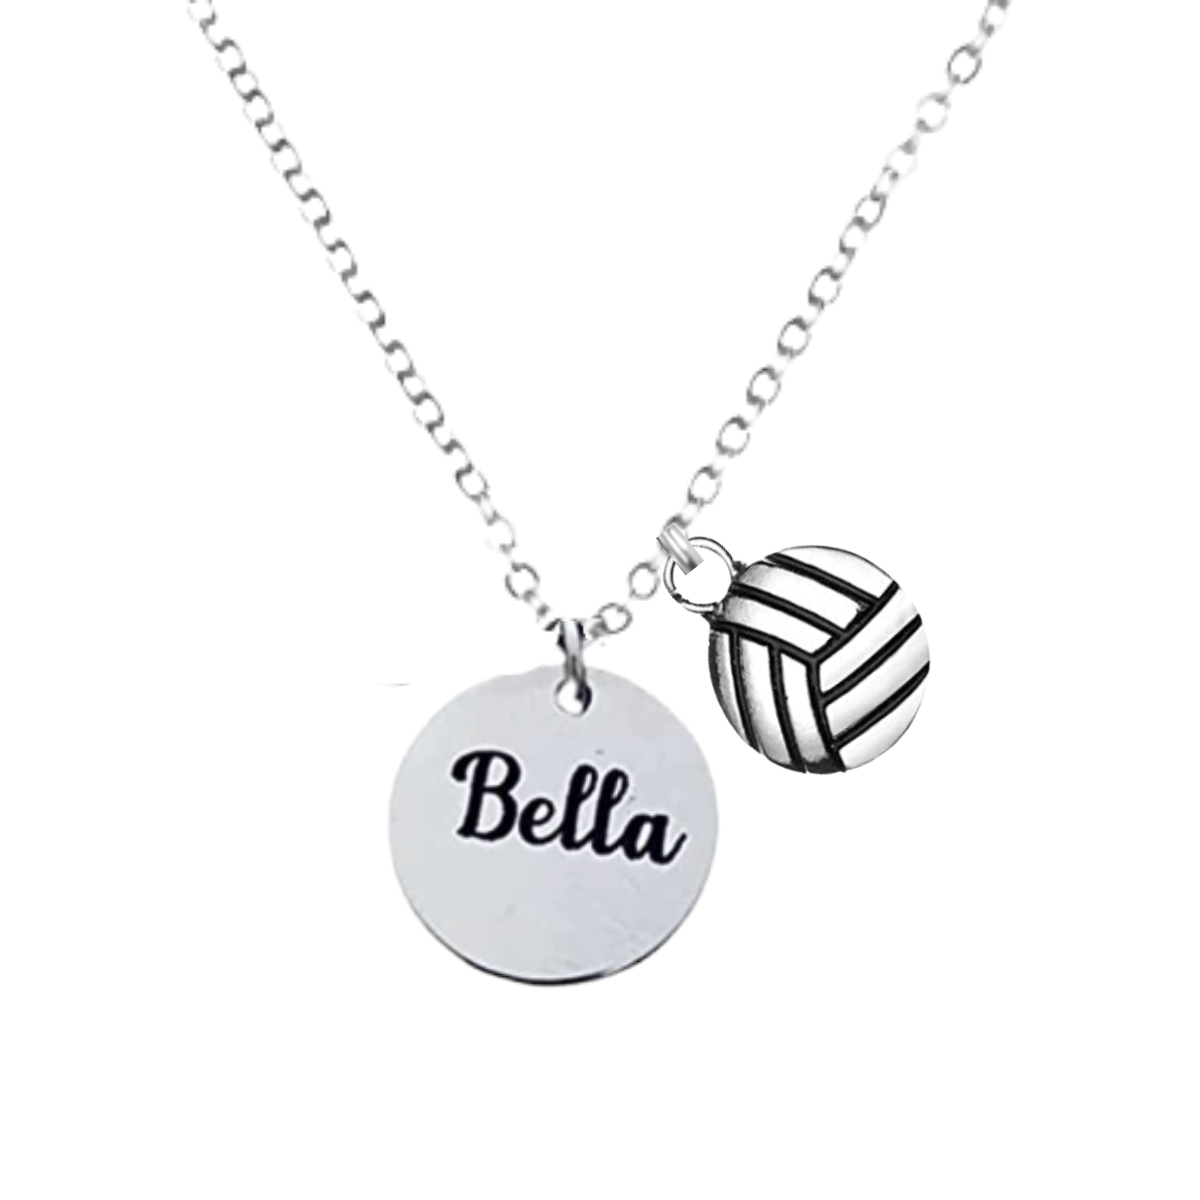 Engraved Volleyball Necklace with Customizable Charms